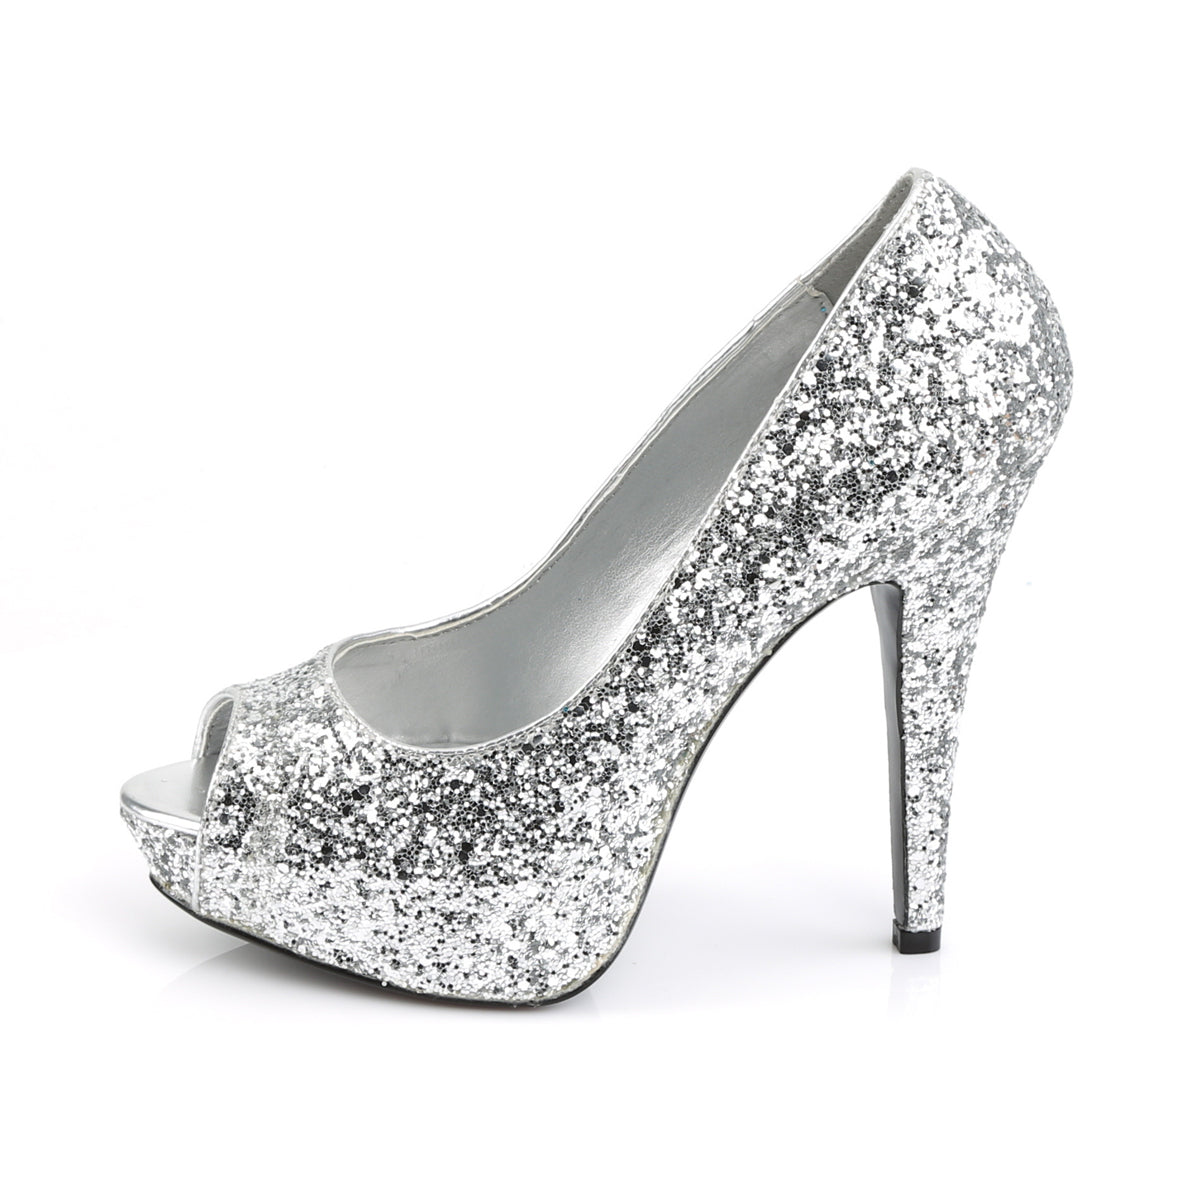 TWINKLE-18G Fabulicious 5 Inch Heel Silver Glitter Sexy Shoe-Fabulicious- Sexy Shoes Pole Dance Heels